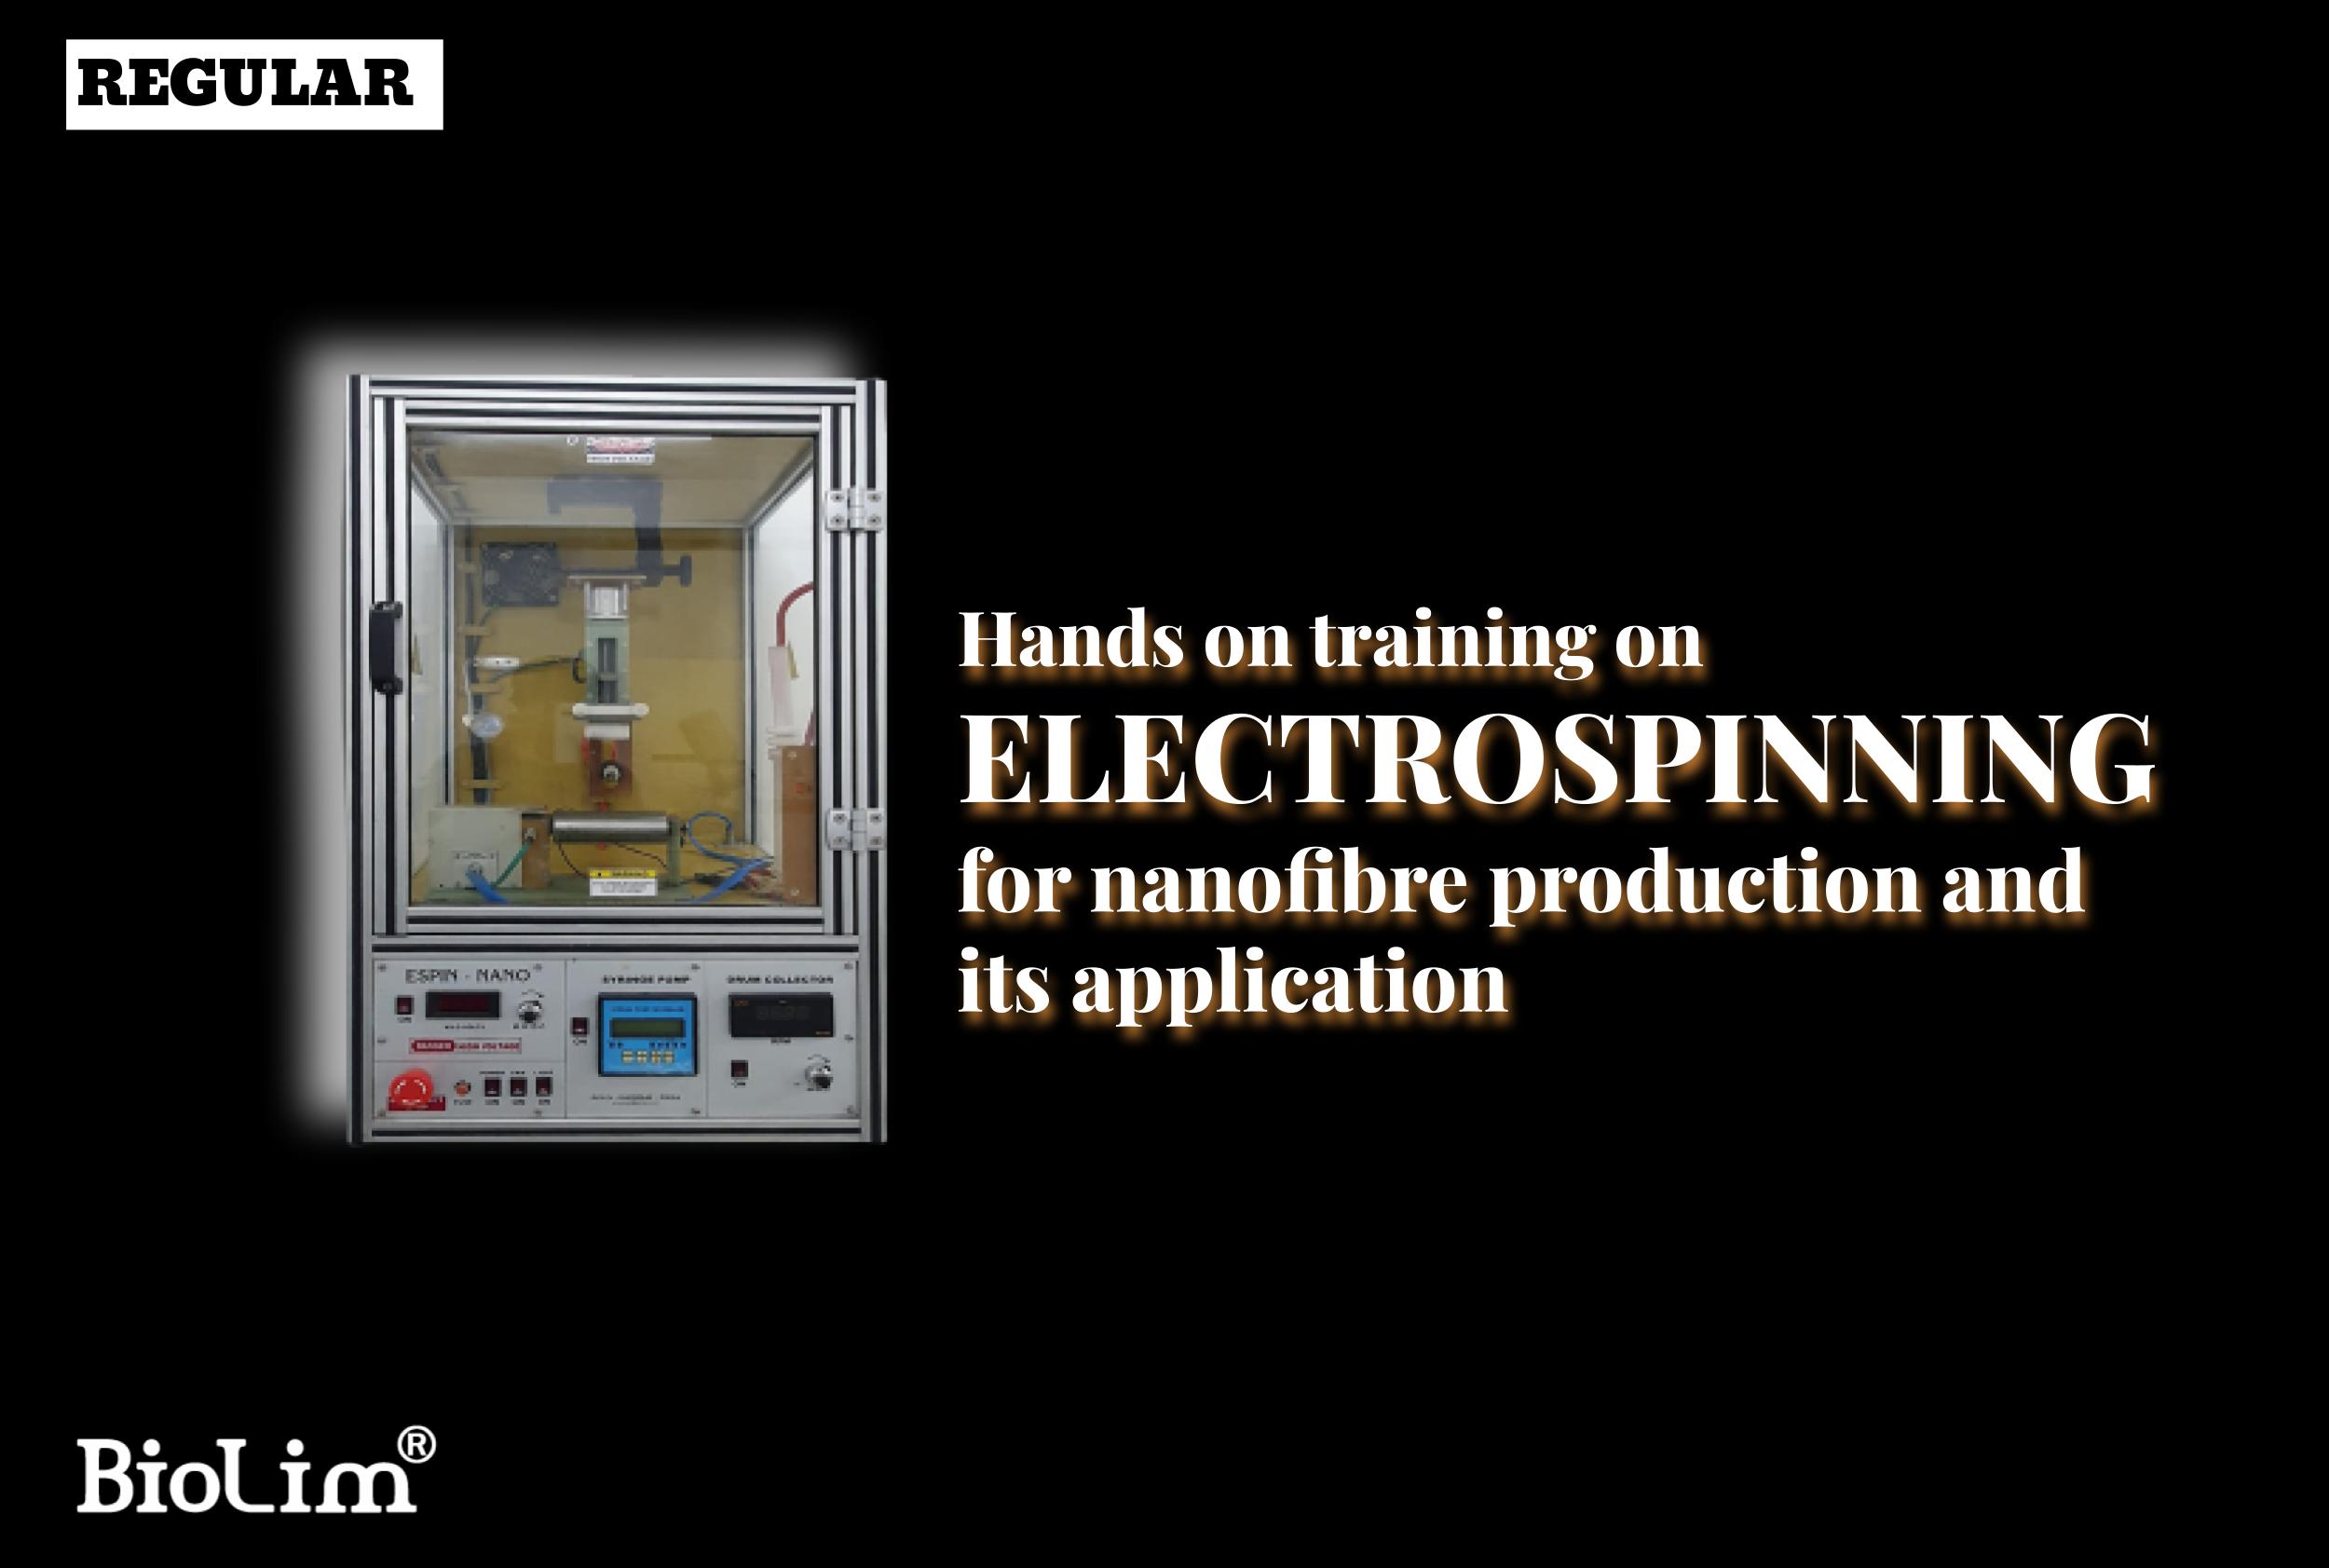 Hands on training in electrospinning for nanofibre production and its application